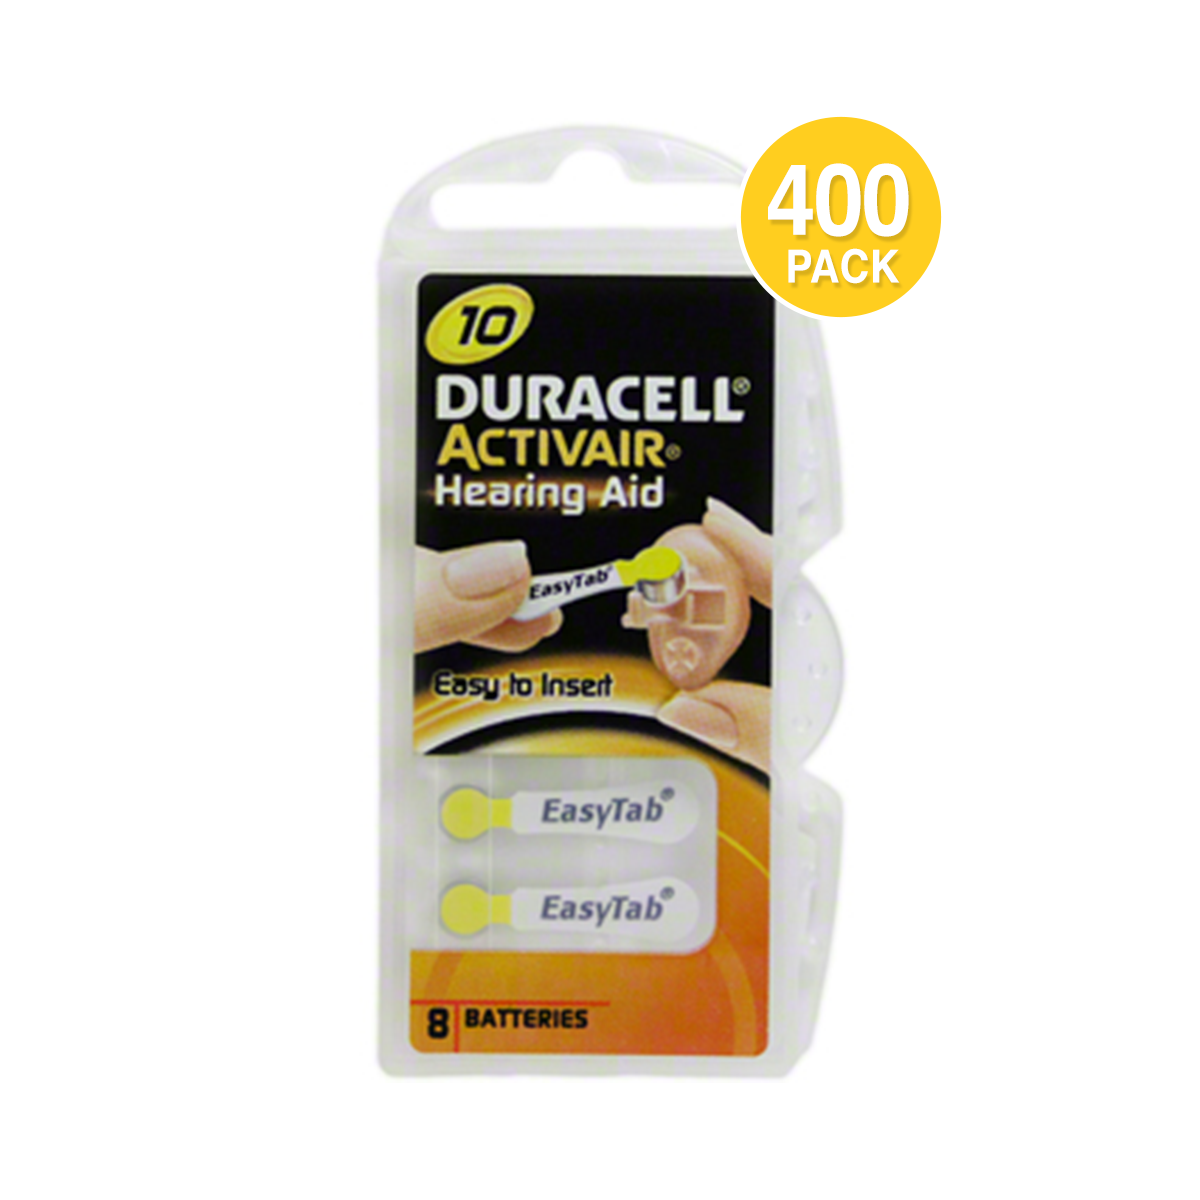 Duracell Hearing Aid Battery Size 10 (400 Pcs)